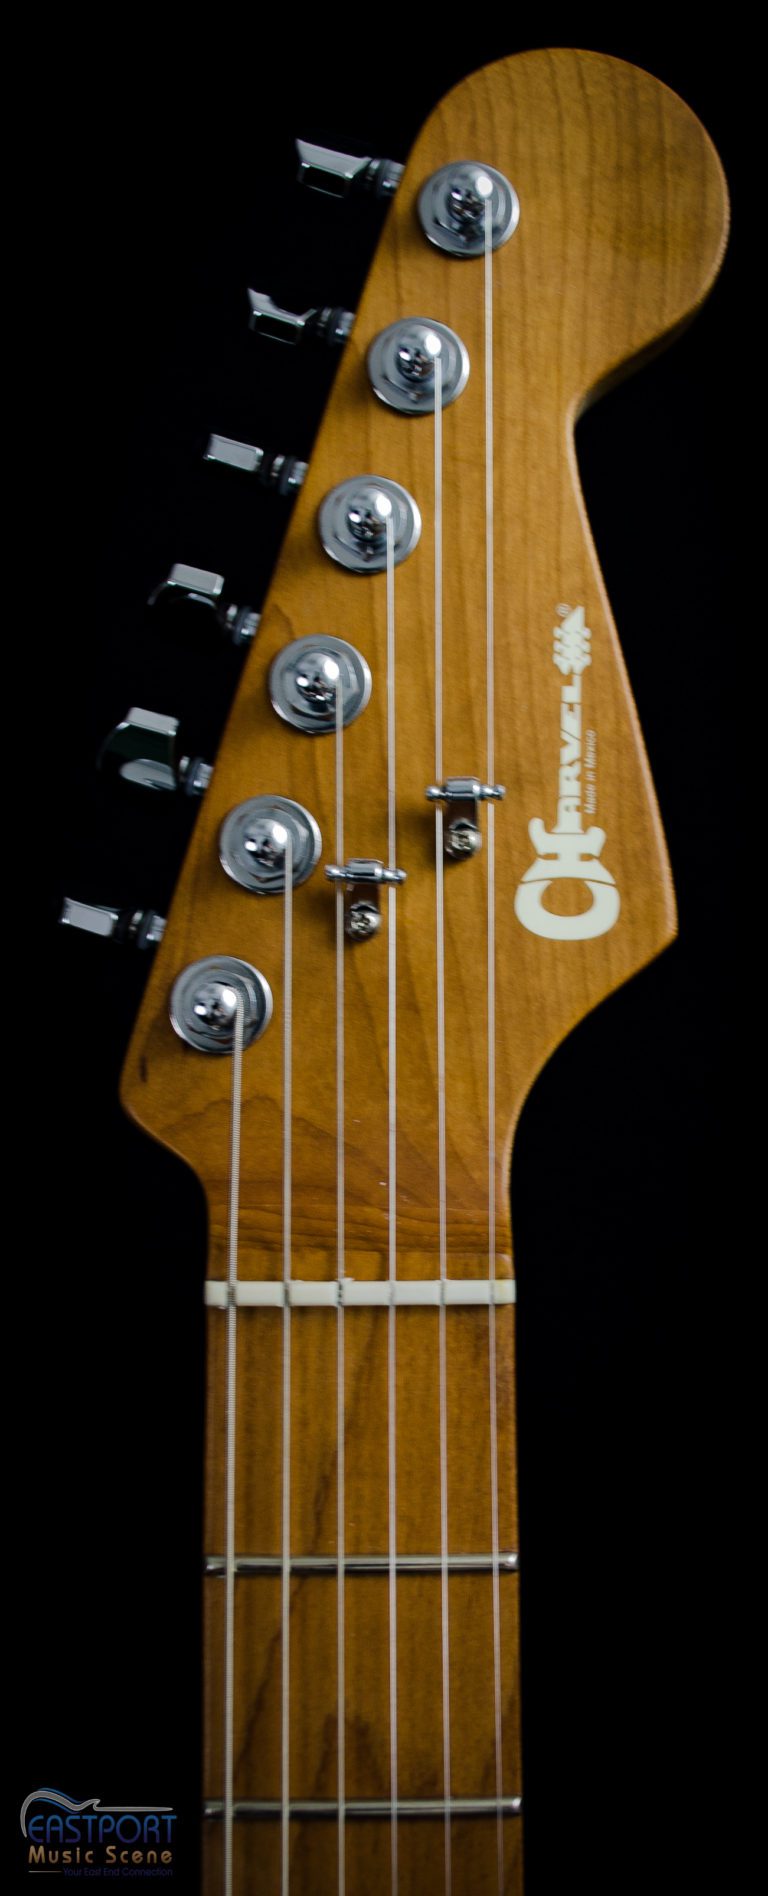 A close up of the neck and headstock on an electric guitar.